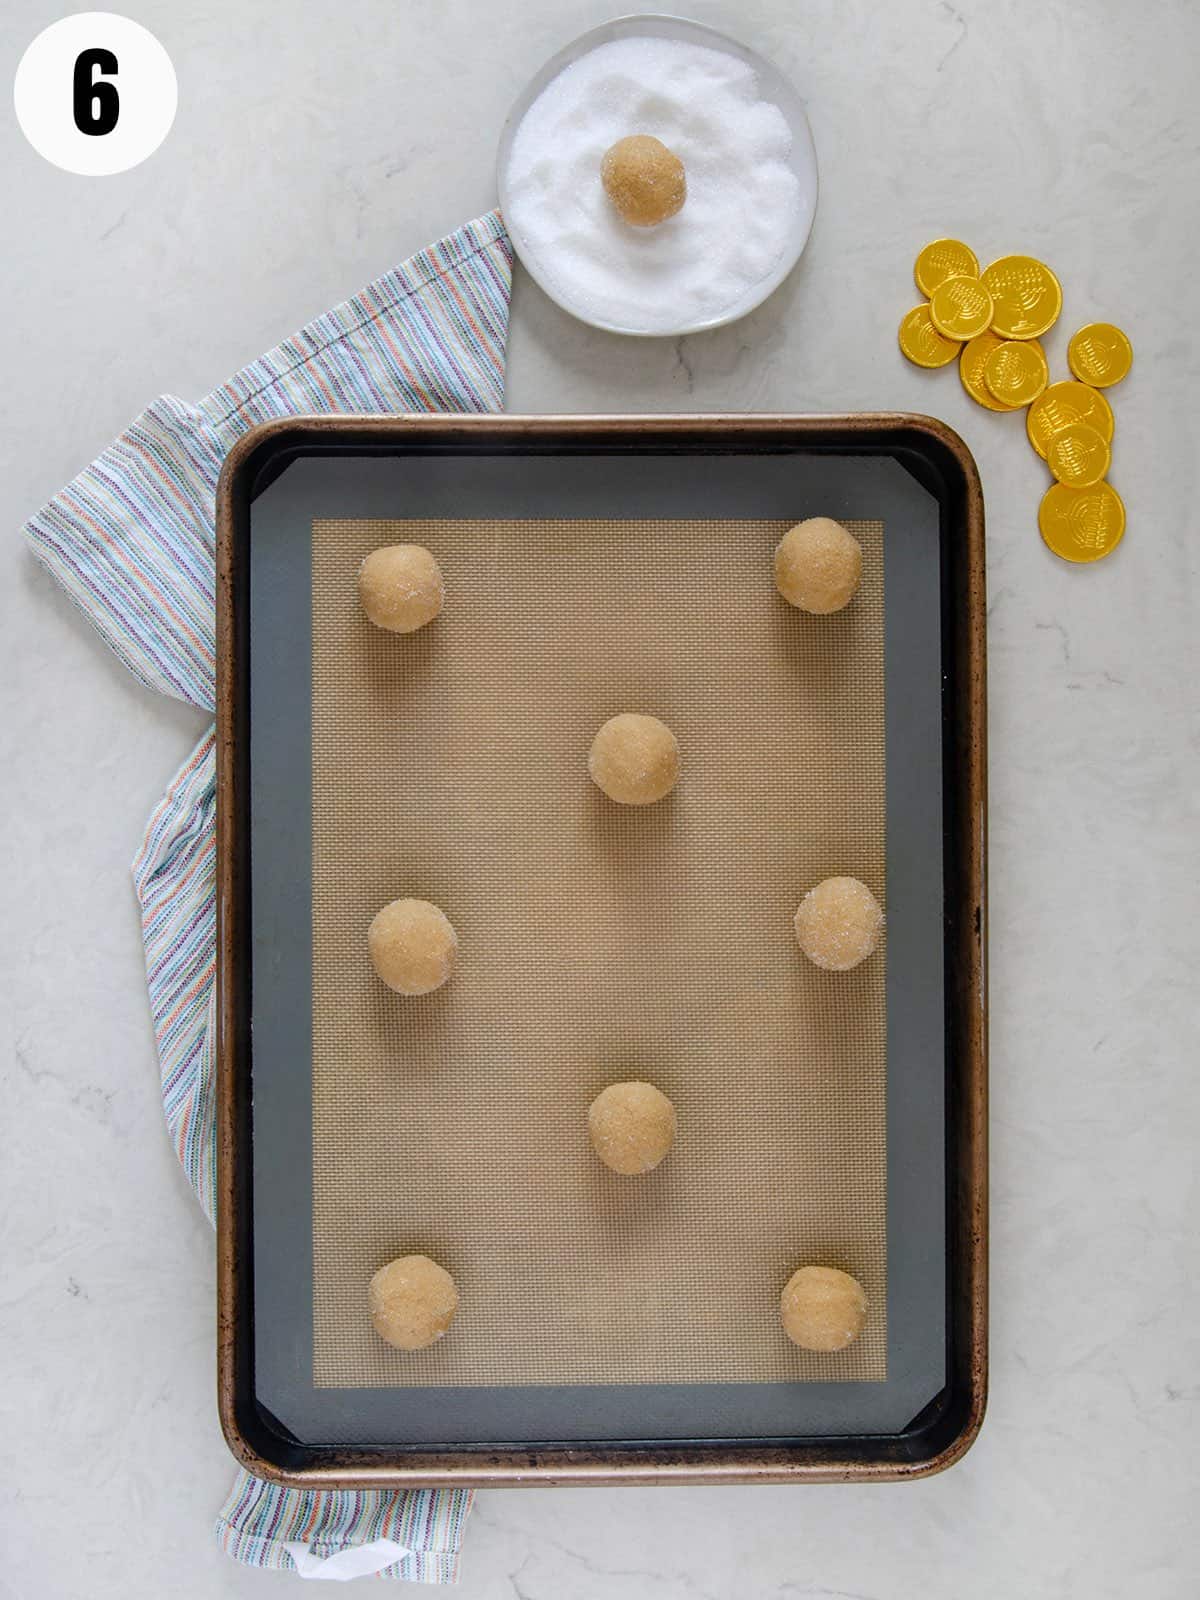 Cookie dough balls rolled in sugar on a baking sheet.